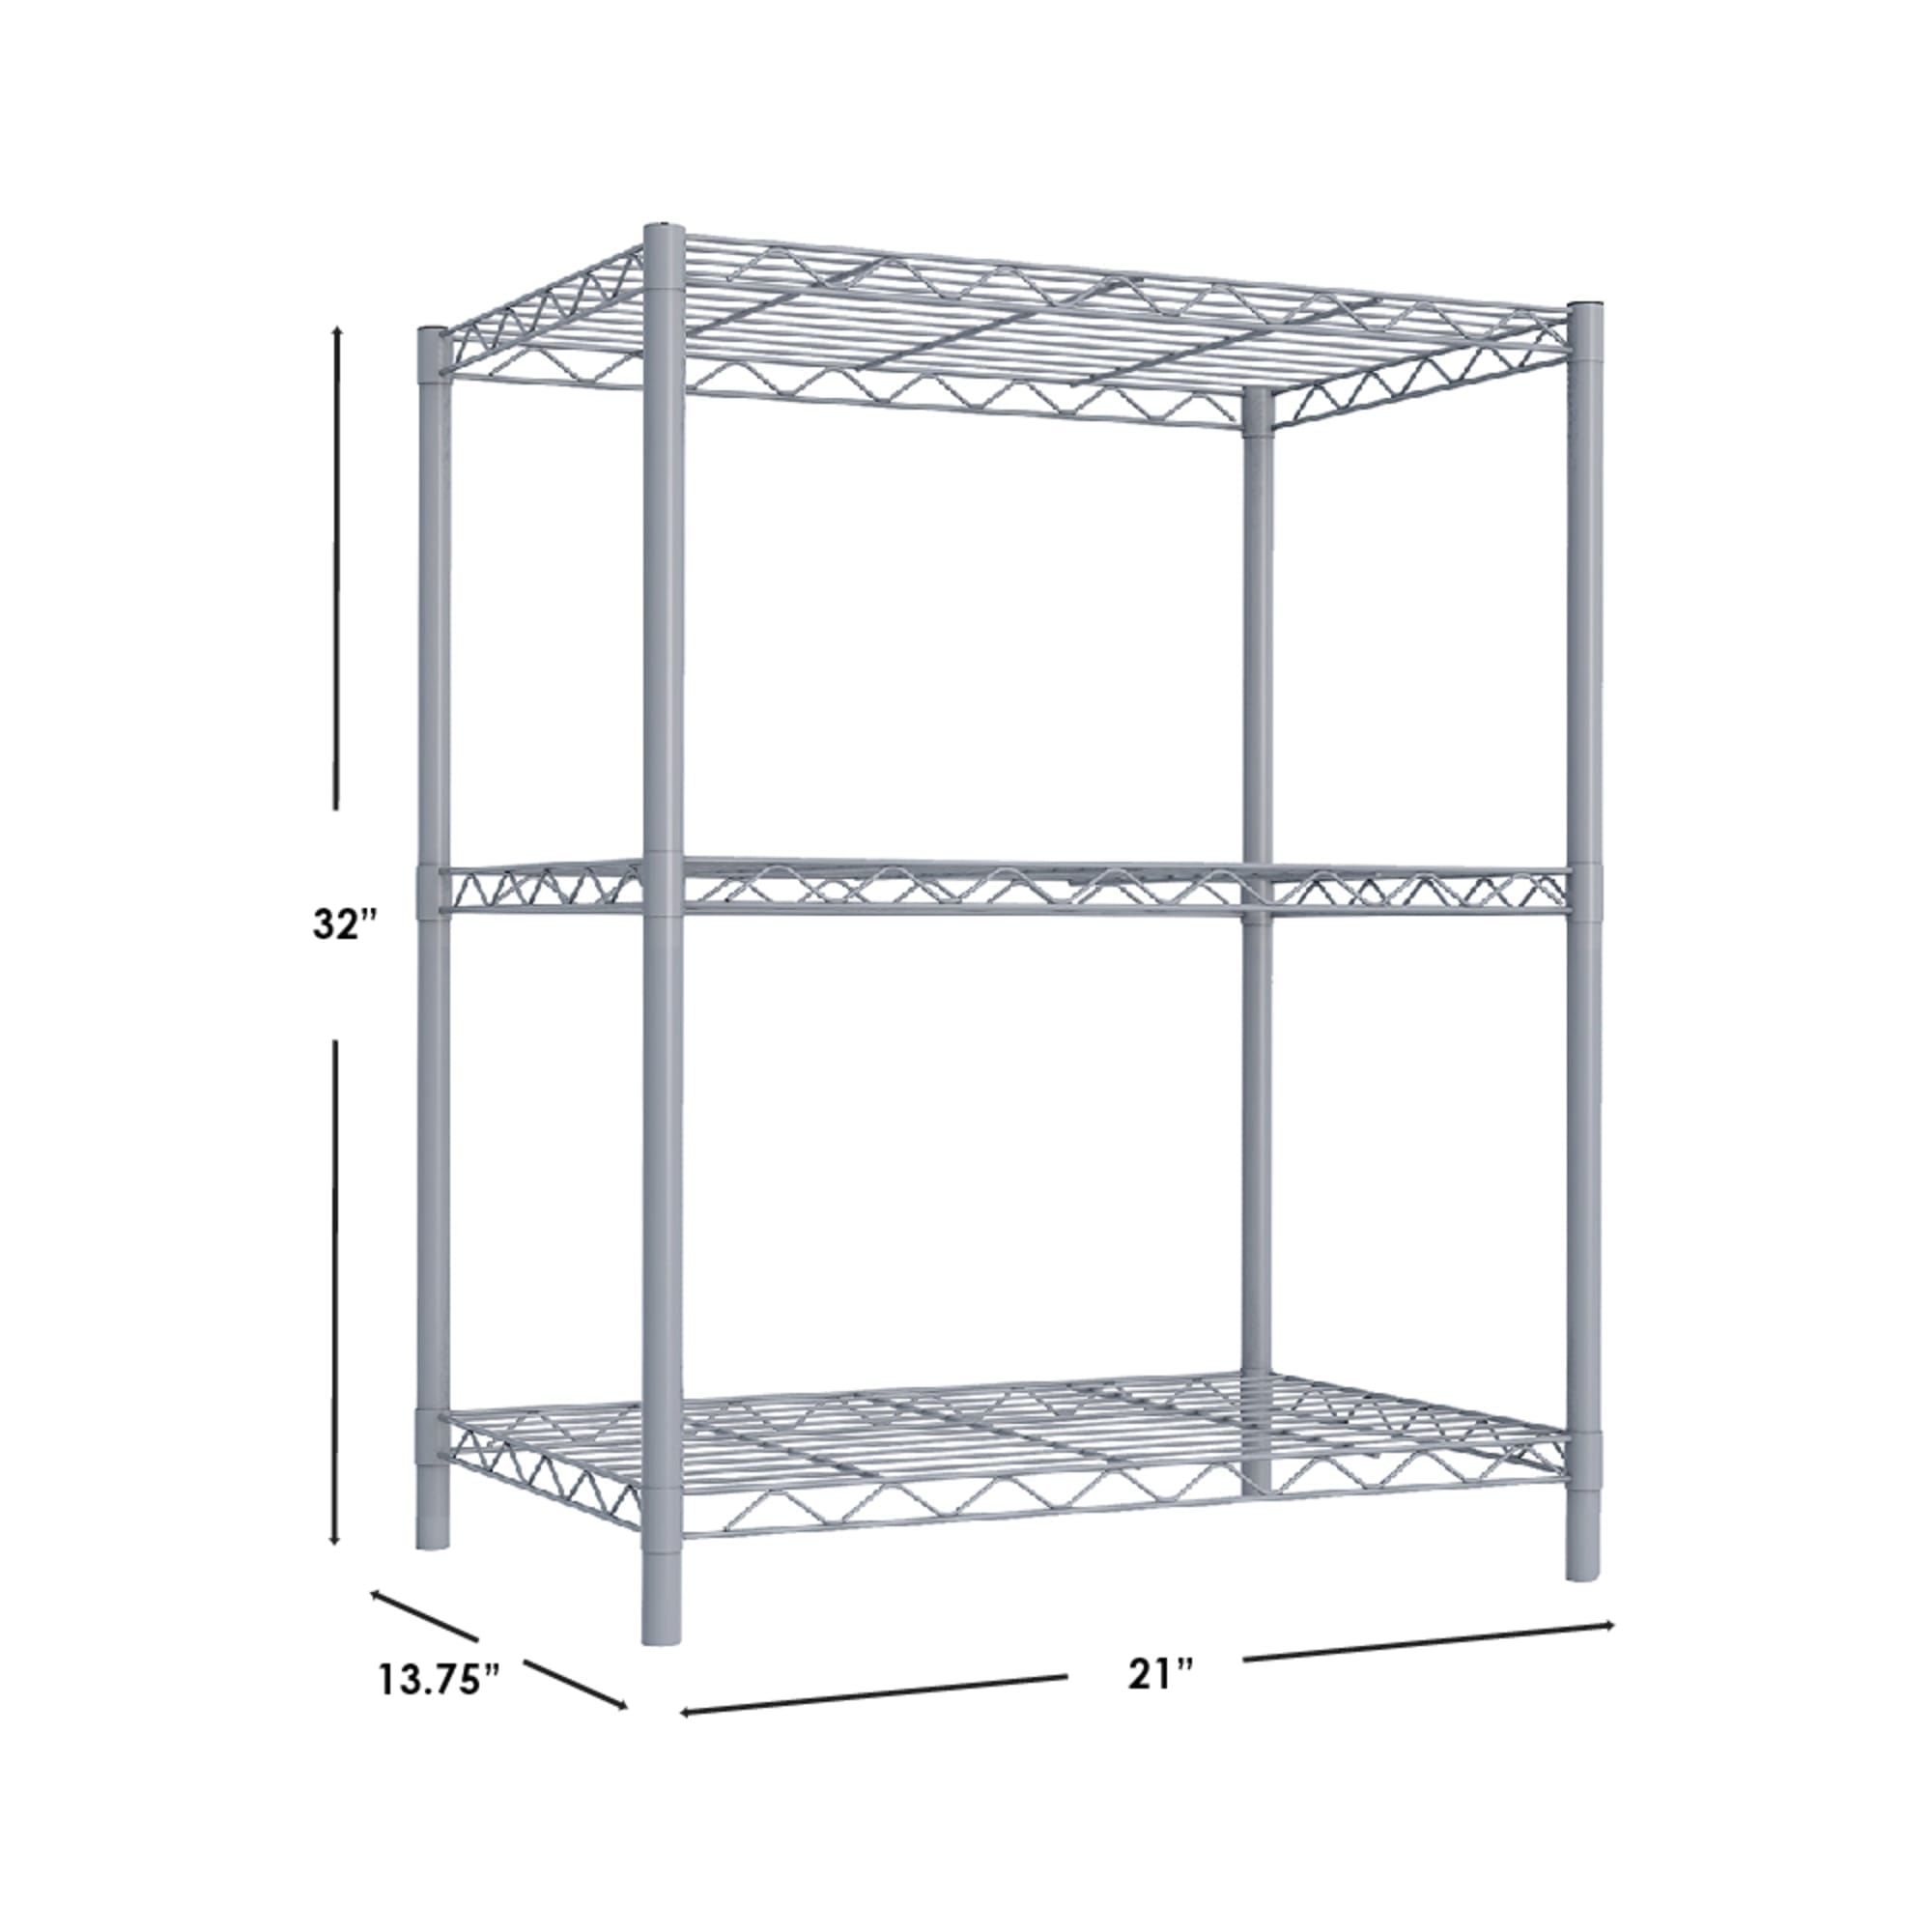 Home Basics 3 Tier Metal Wire Shelf, Grey $30.00 EACH, CASE PACK OF 4